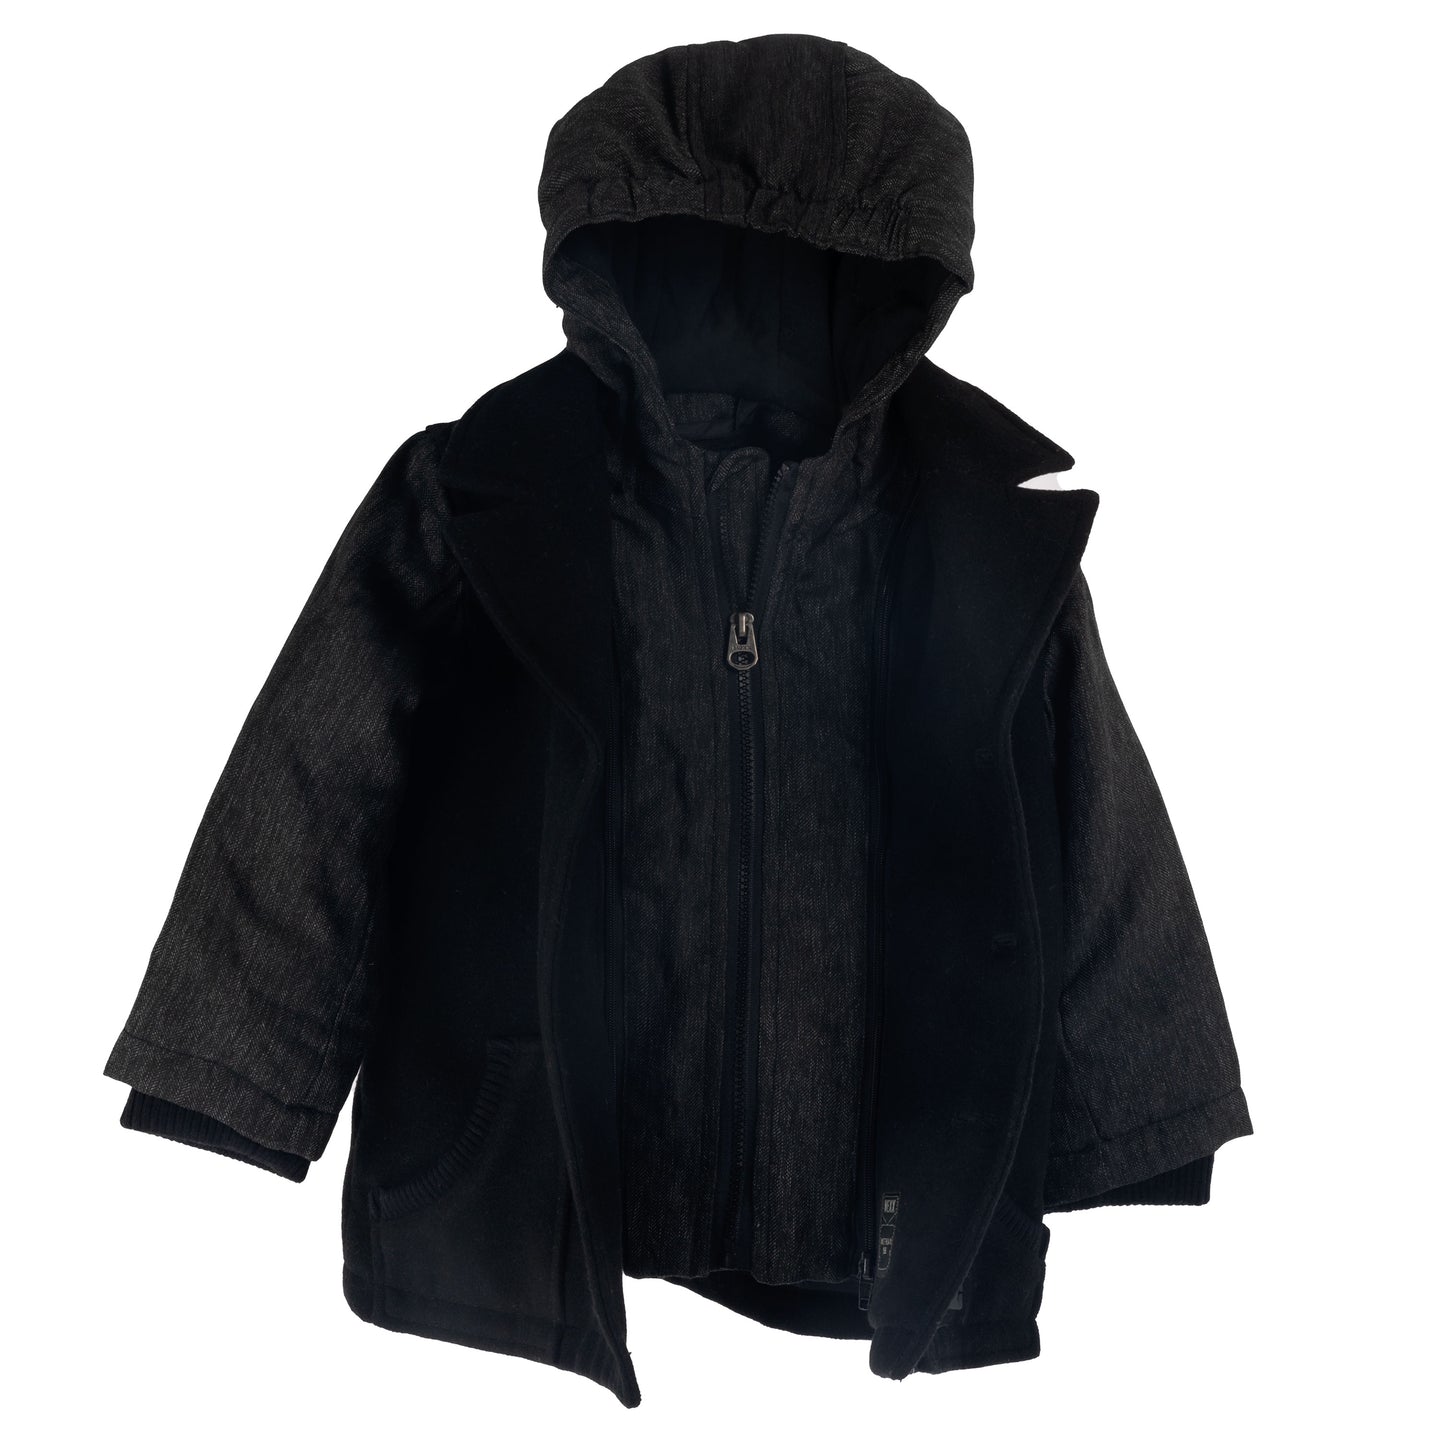 [9-12m] MEXX Baby Double Breasted Coat BNWT